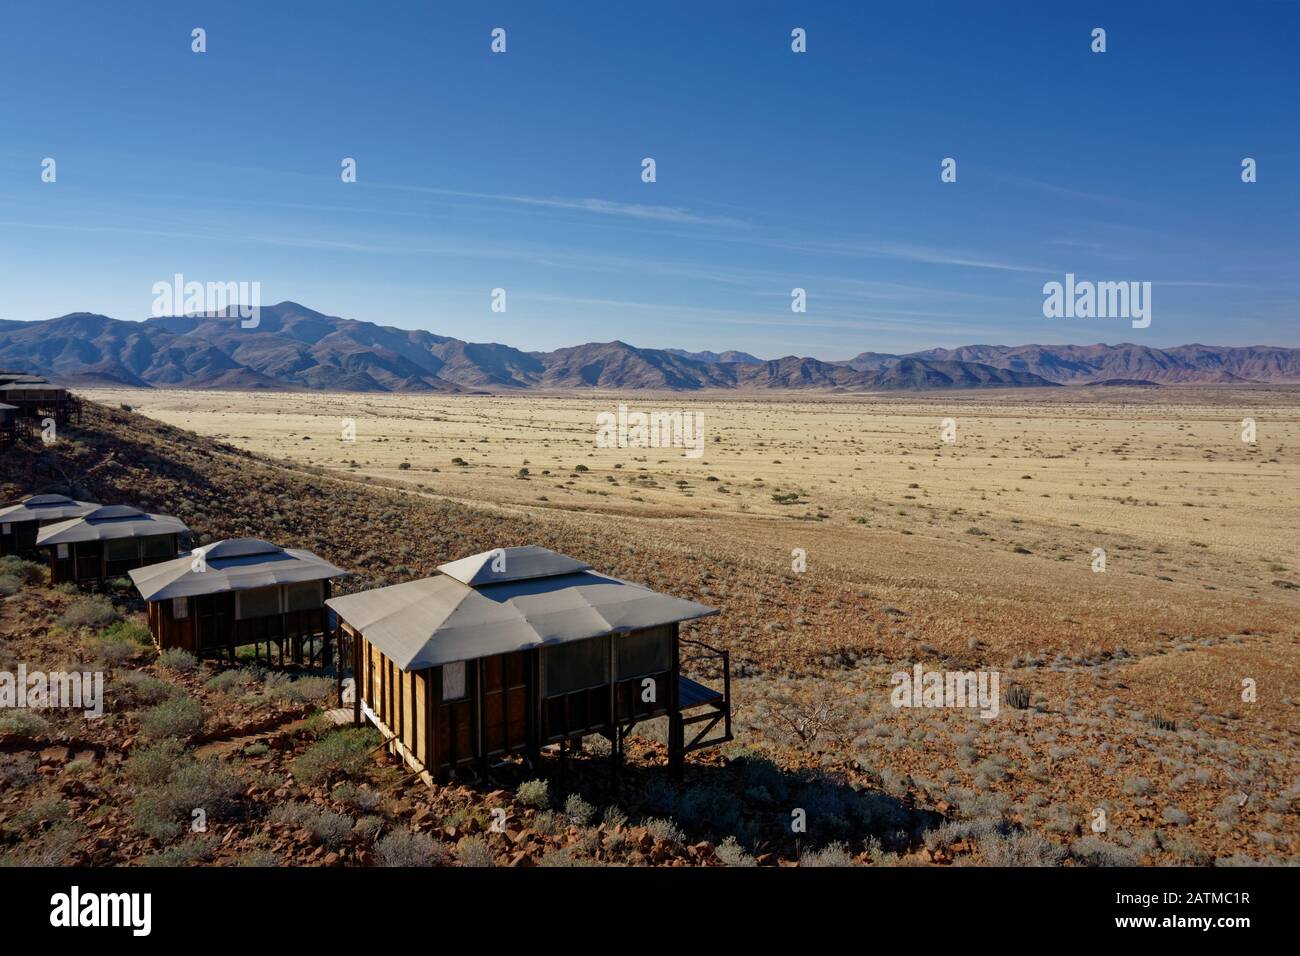 A martian landscape, typical tourist accommodation high on stilts in the desert, Namibia, Africa. Stock Photo